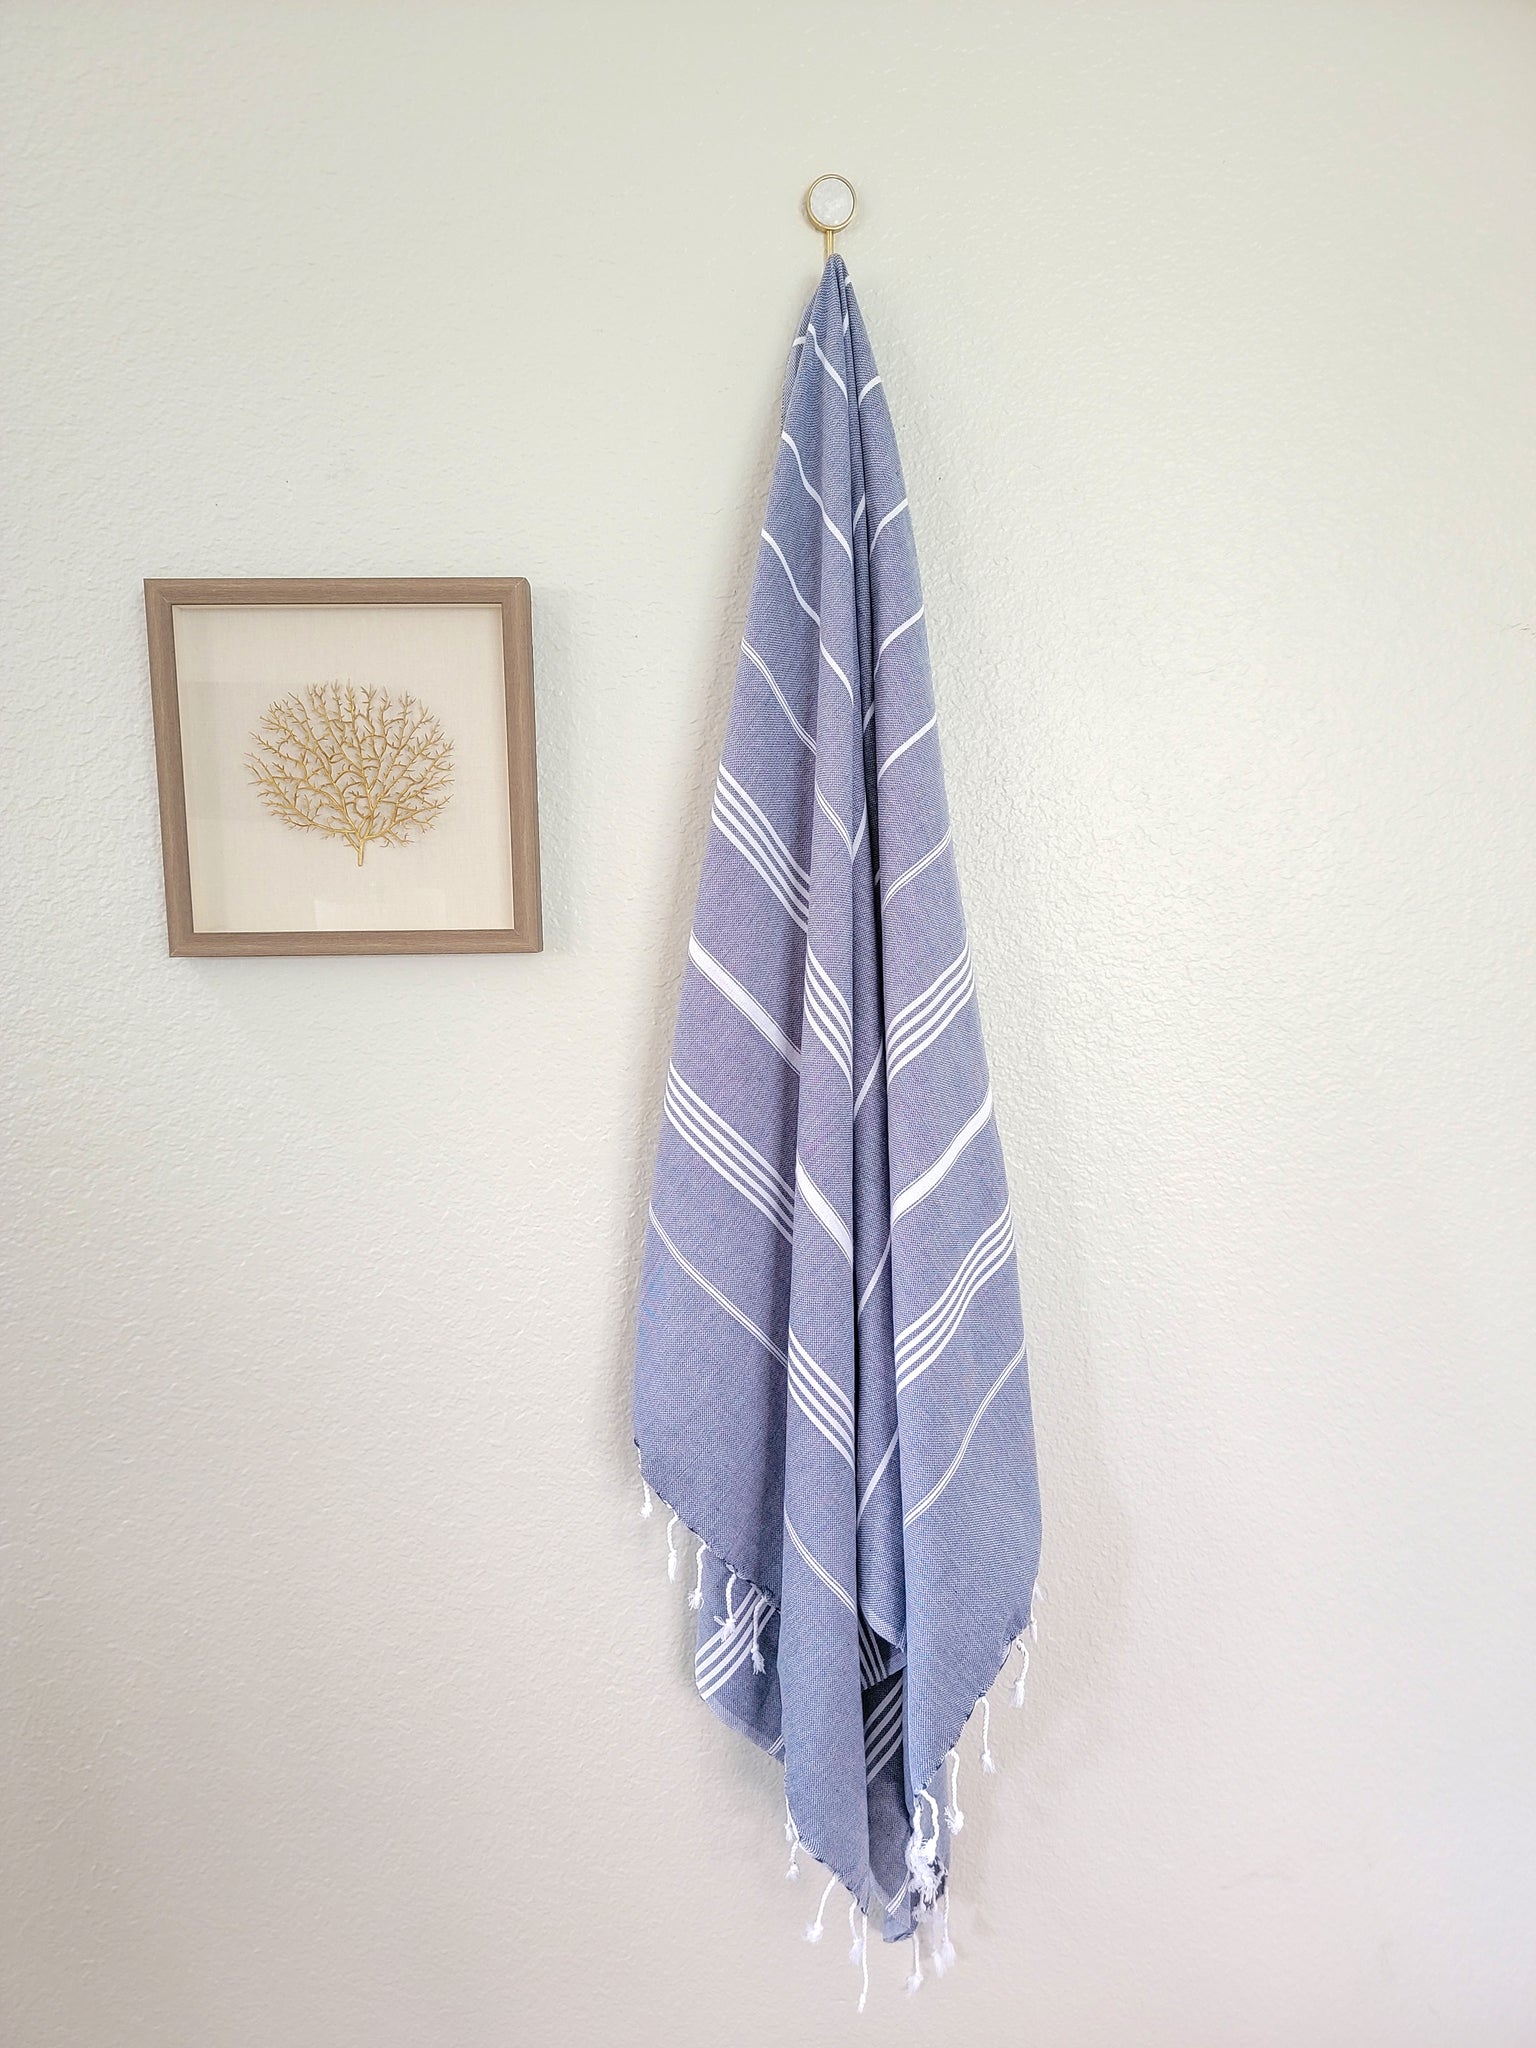 Havly | The Classic Bath Towel in Zissou Blue